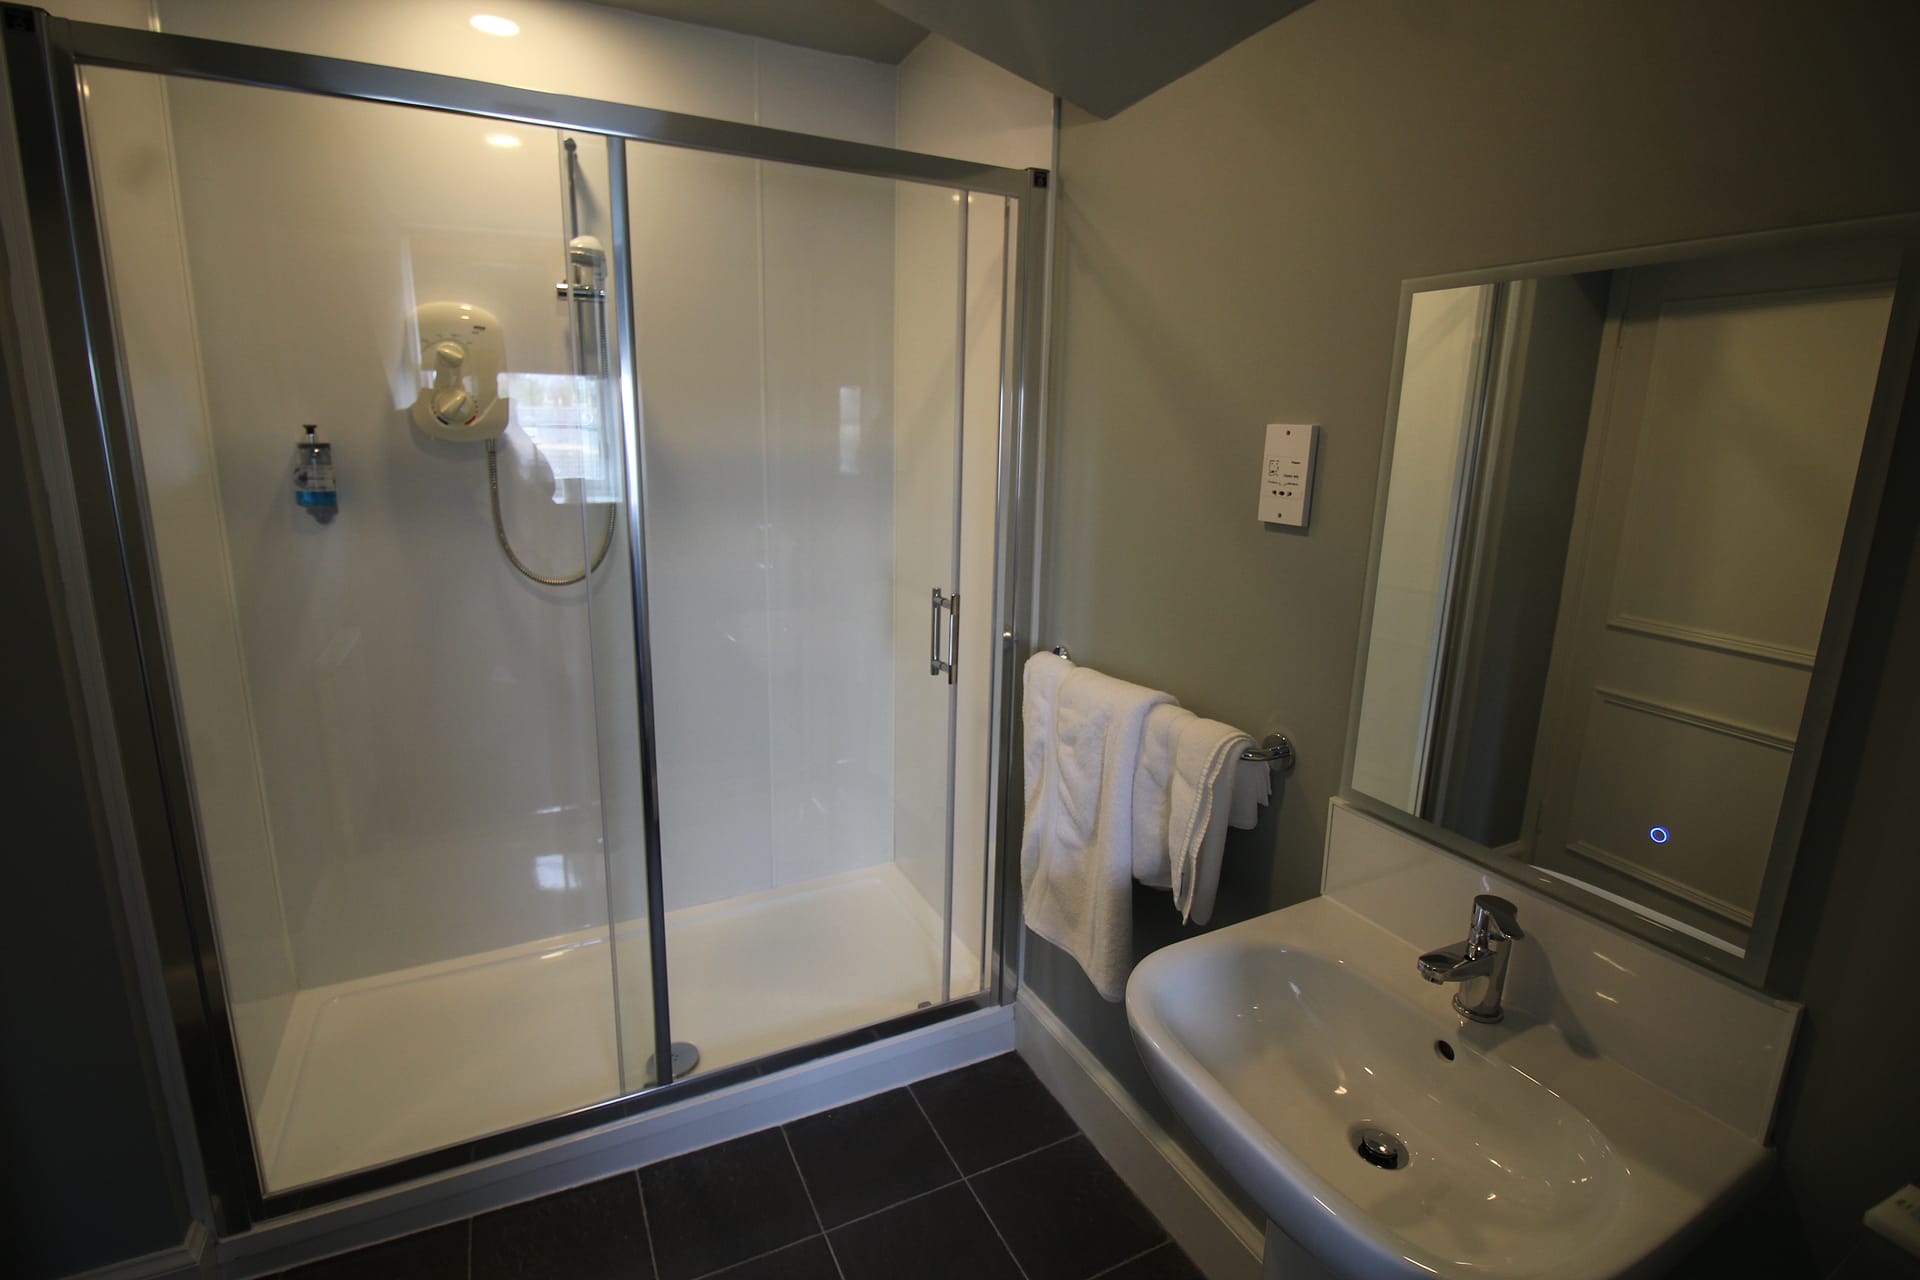 An Elgin hotel room with a shower and sink for guests to freshen up after enjoying their breakfast.